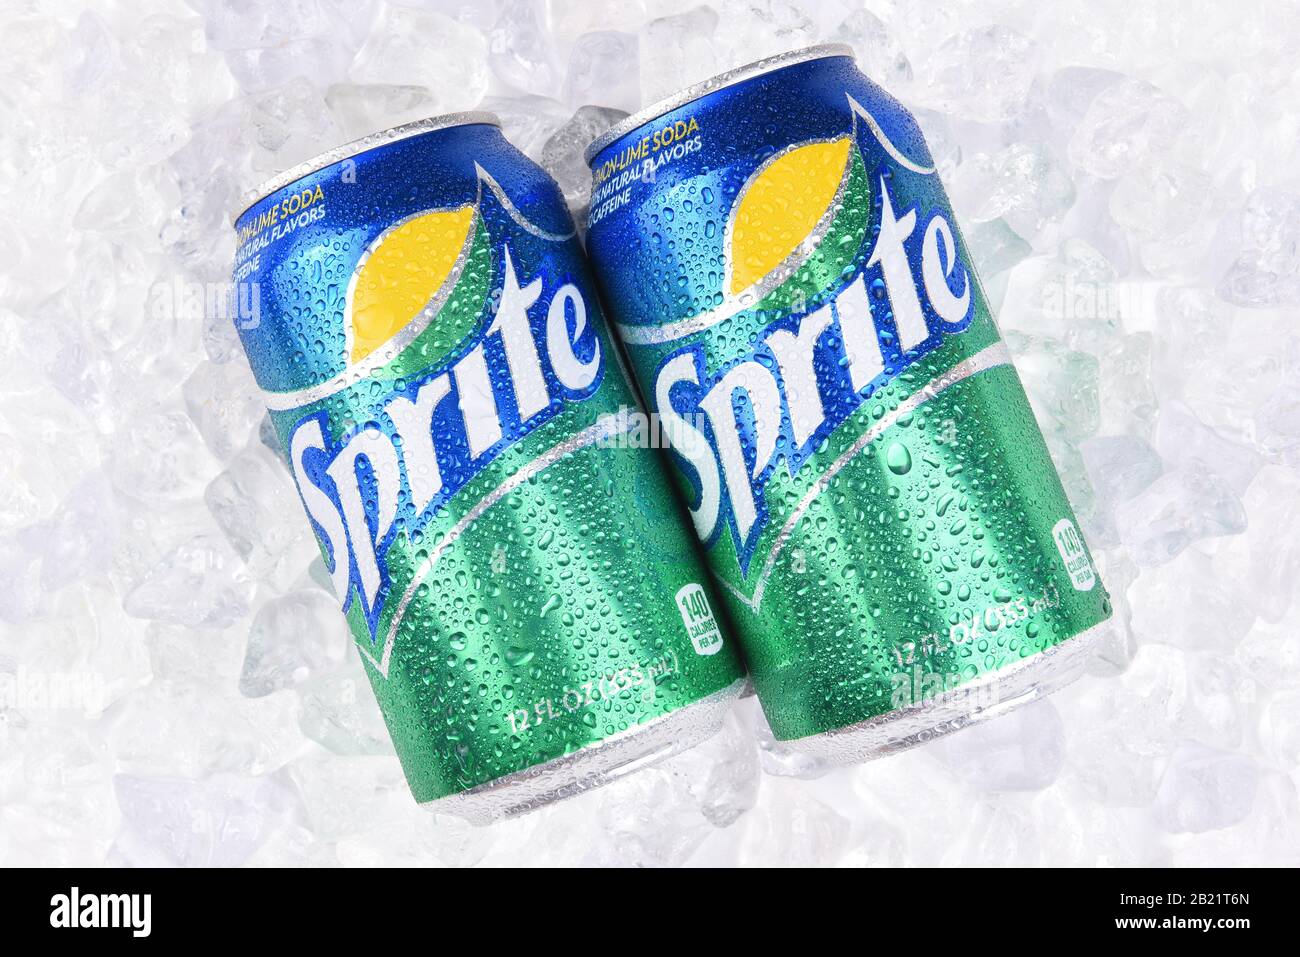 IRVINE, CALIFORNIA - JULY 10, 2017: Two Sprite Cans on a bed of ice with condensation. Sprite is a lemon lime soft drink from the Coca-Cola Comapny. Stock Photo